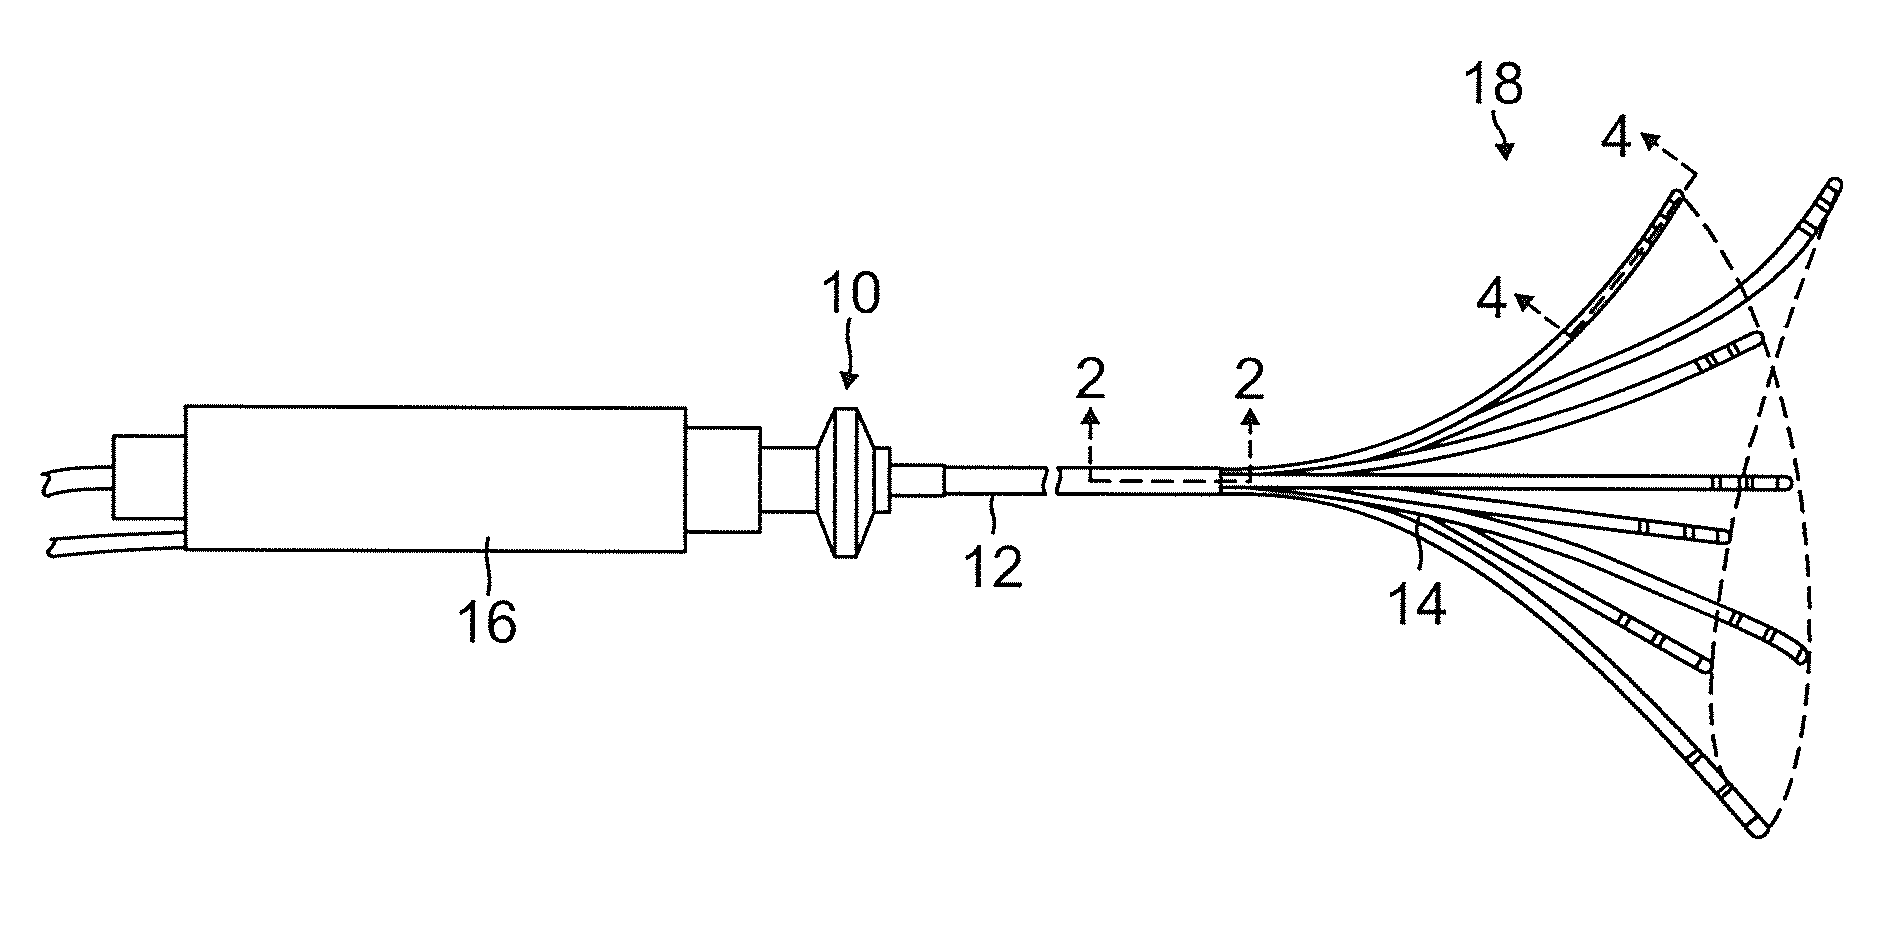 Catheter with multiple spines of different lengths arranged in one or more distal assemblies